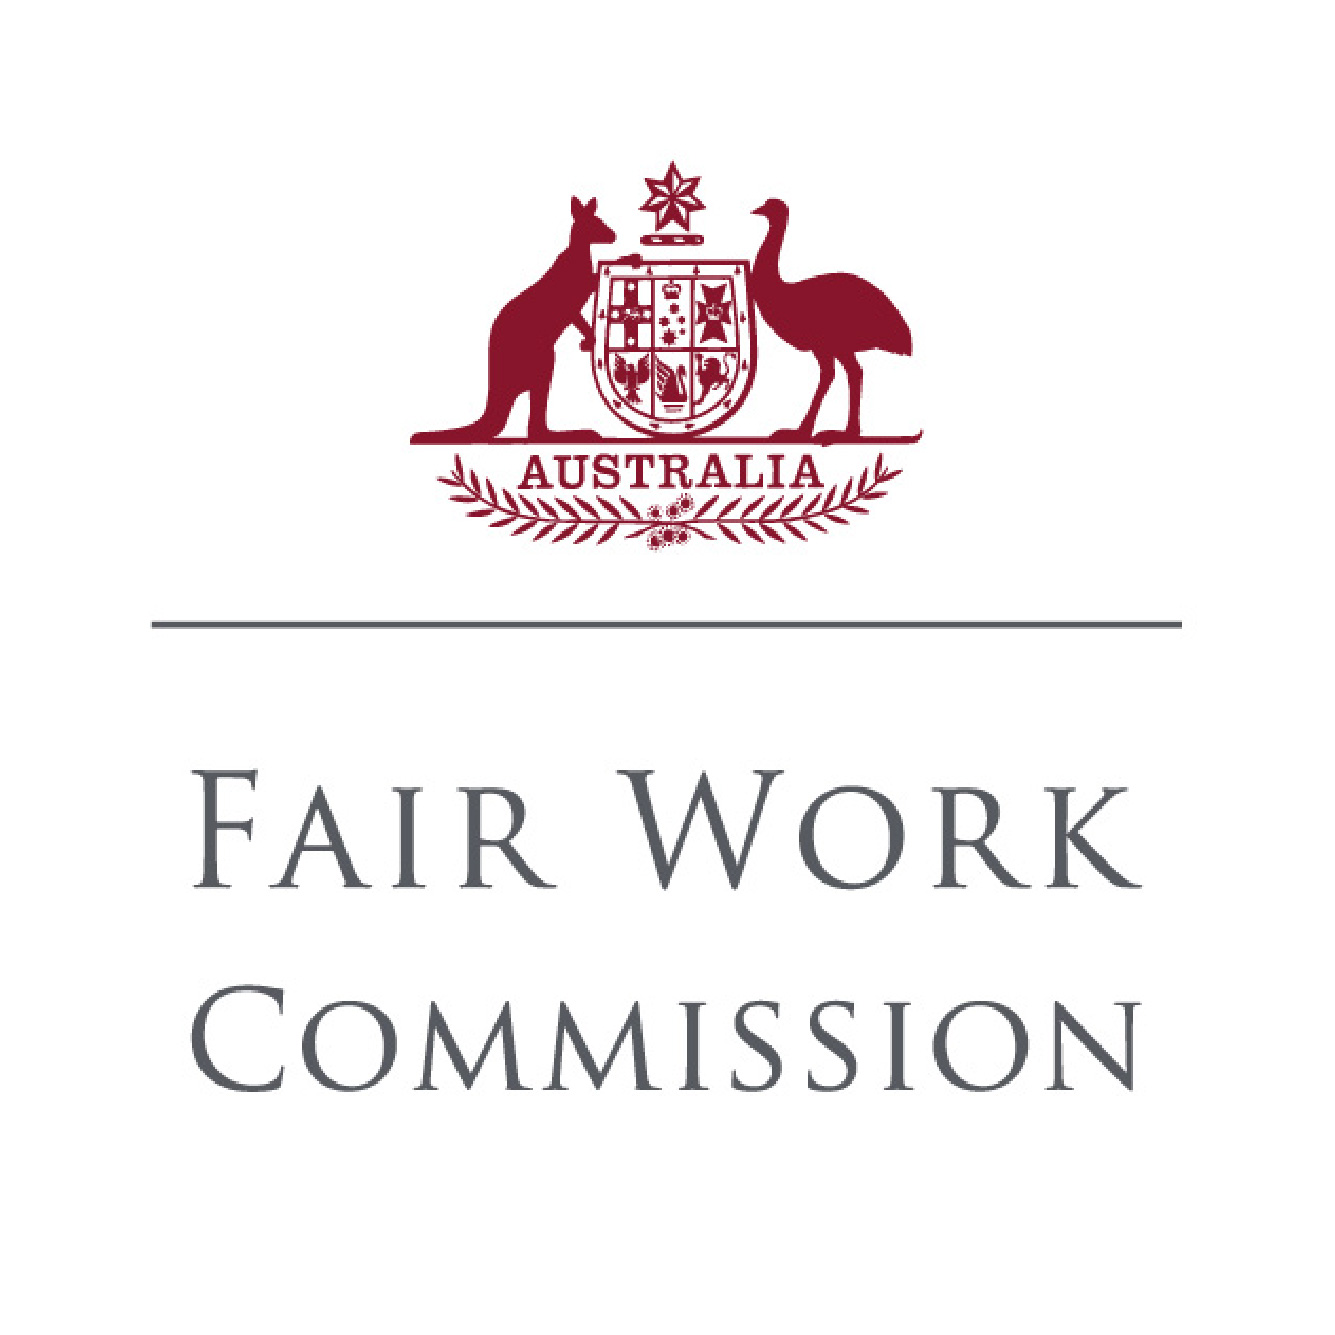 Our clients include household Australian names such as the Fair Work Commission.